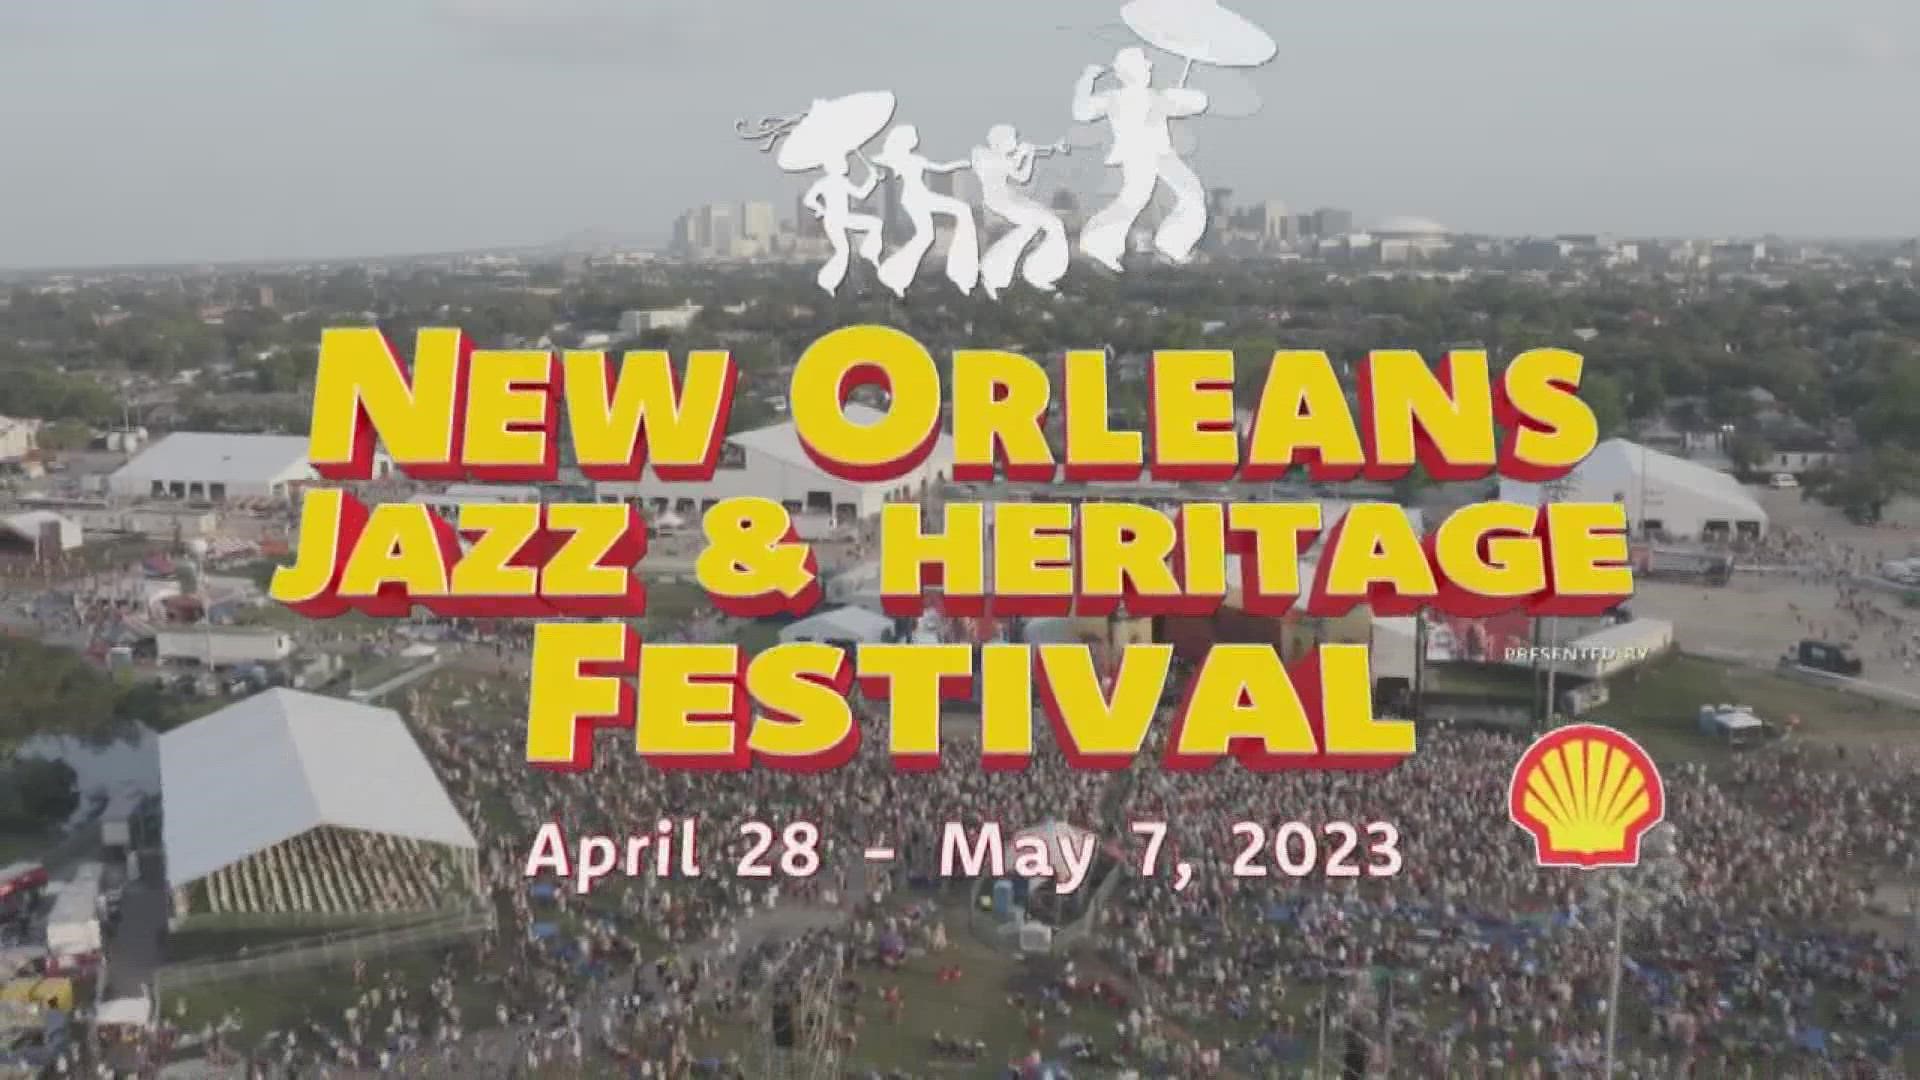 Jazz Fest lineup features Ed Sheeran, Lizzo, and more.